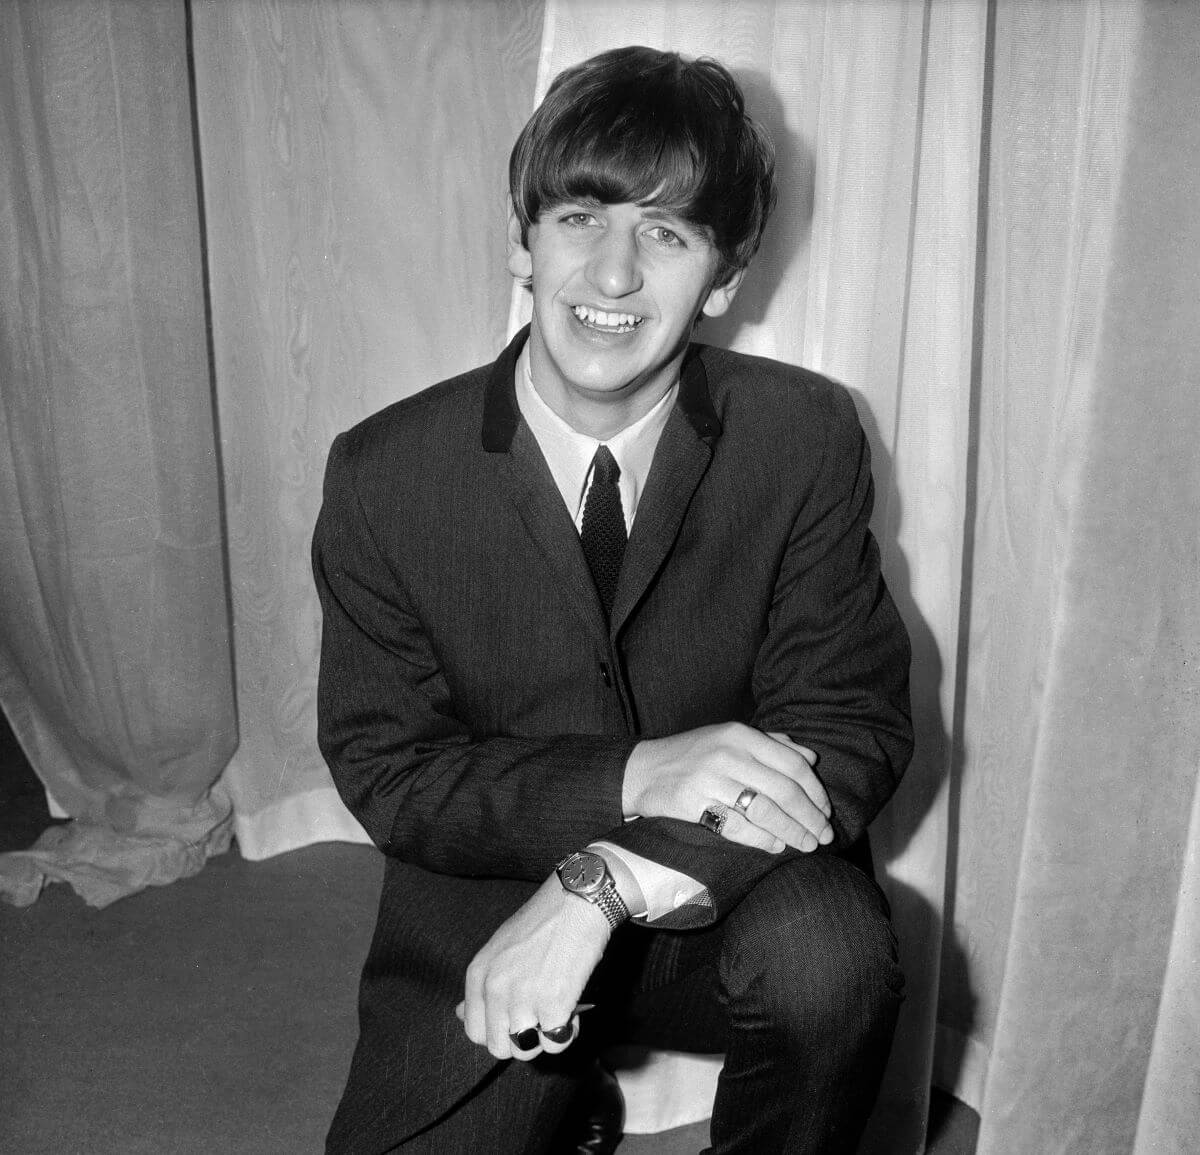 A black and white picture of Ringo Starr wearing a suit and kneeling.